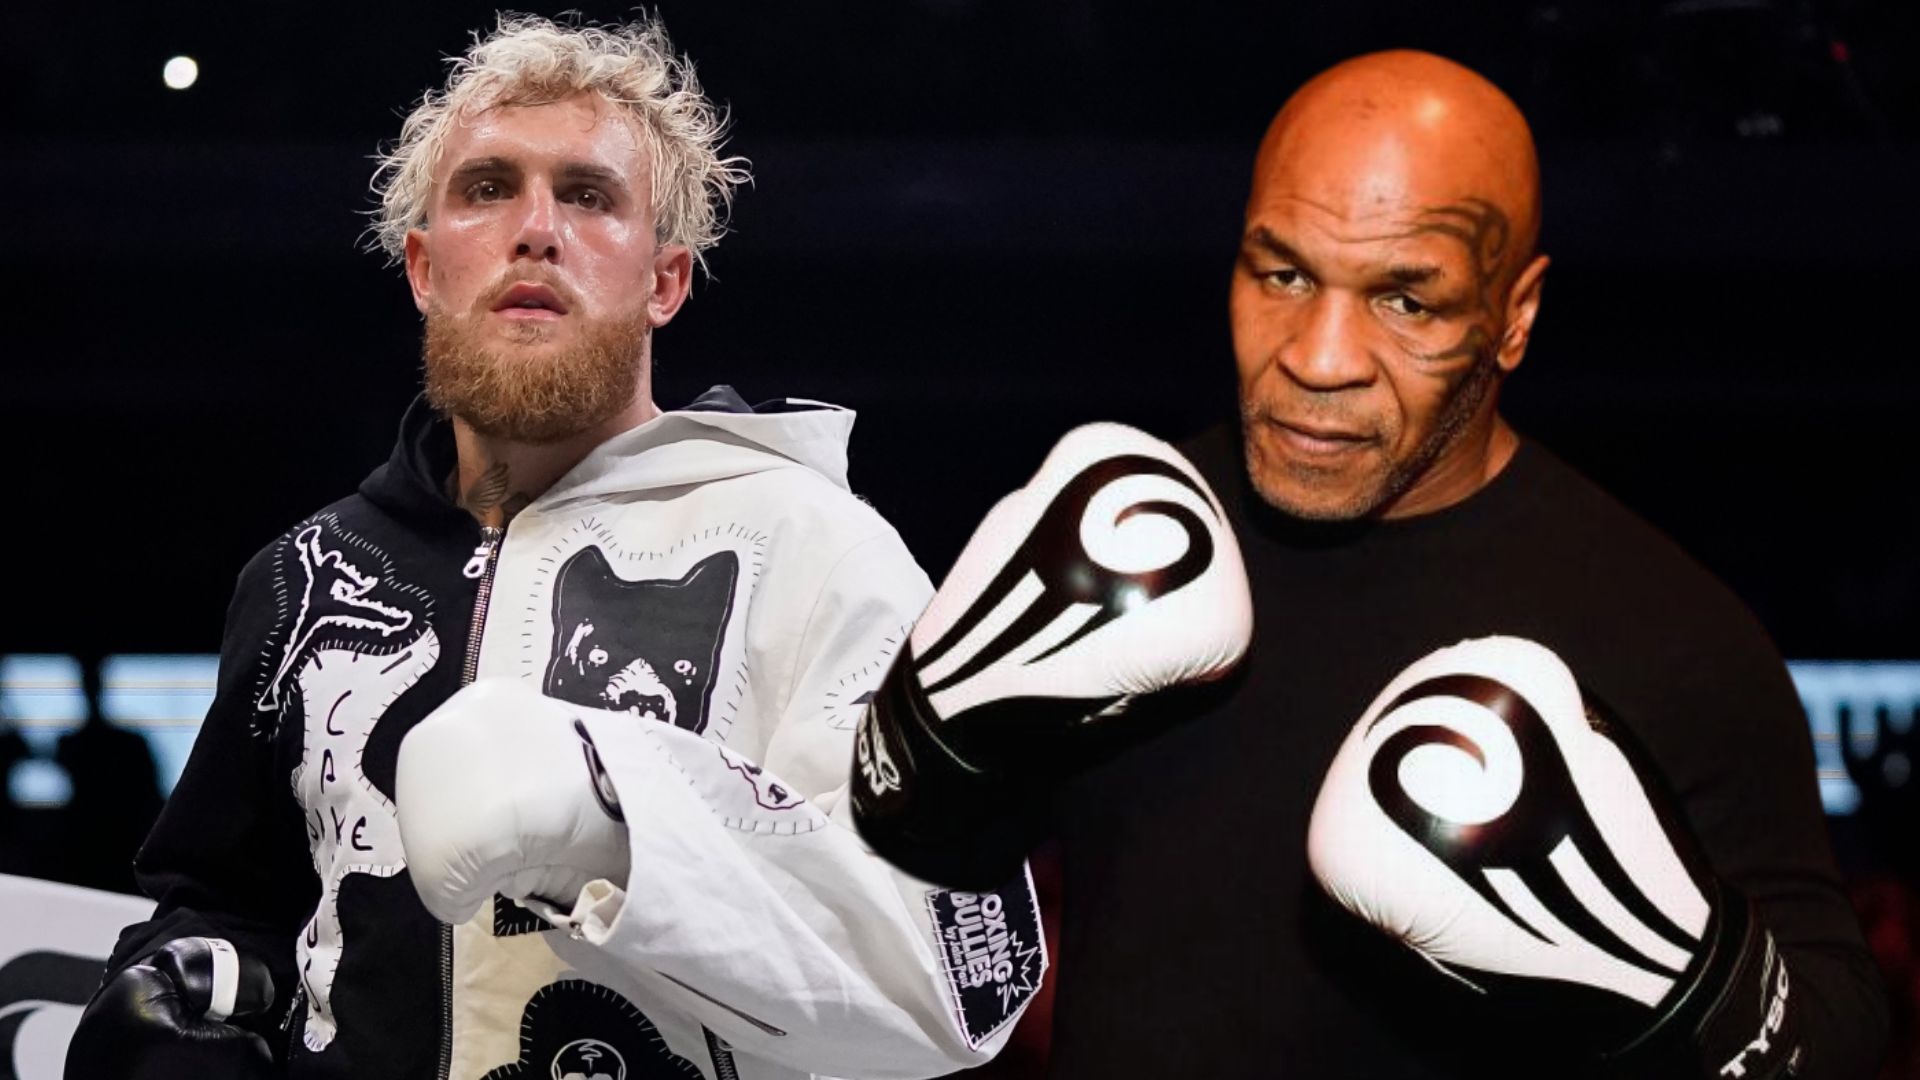 Jake Paul vs. Mike Tyson Match Confirmed: Here’s What’s Coming